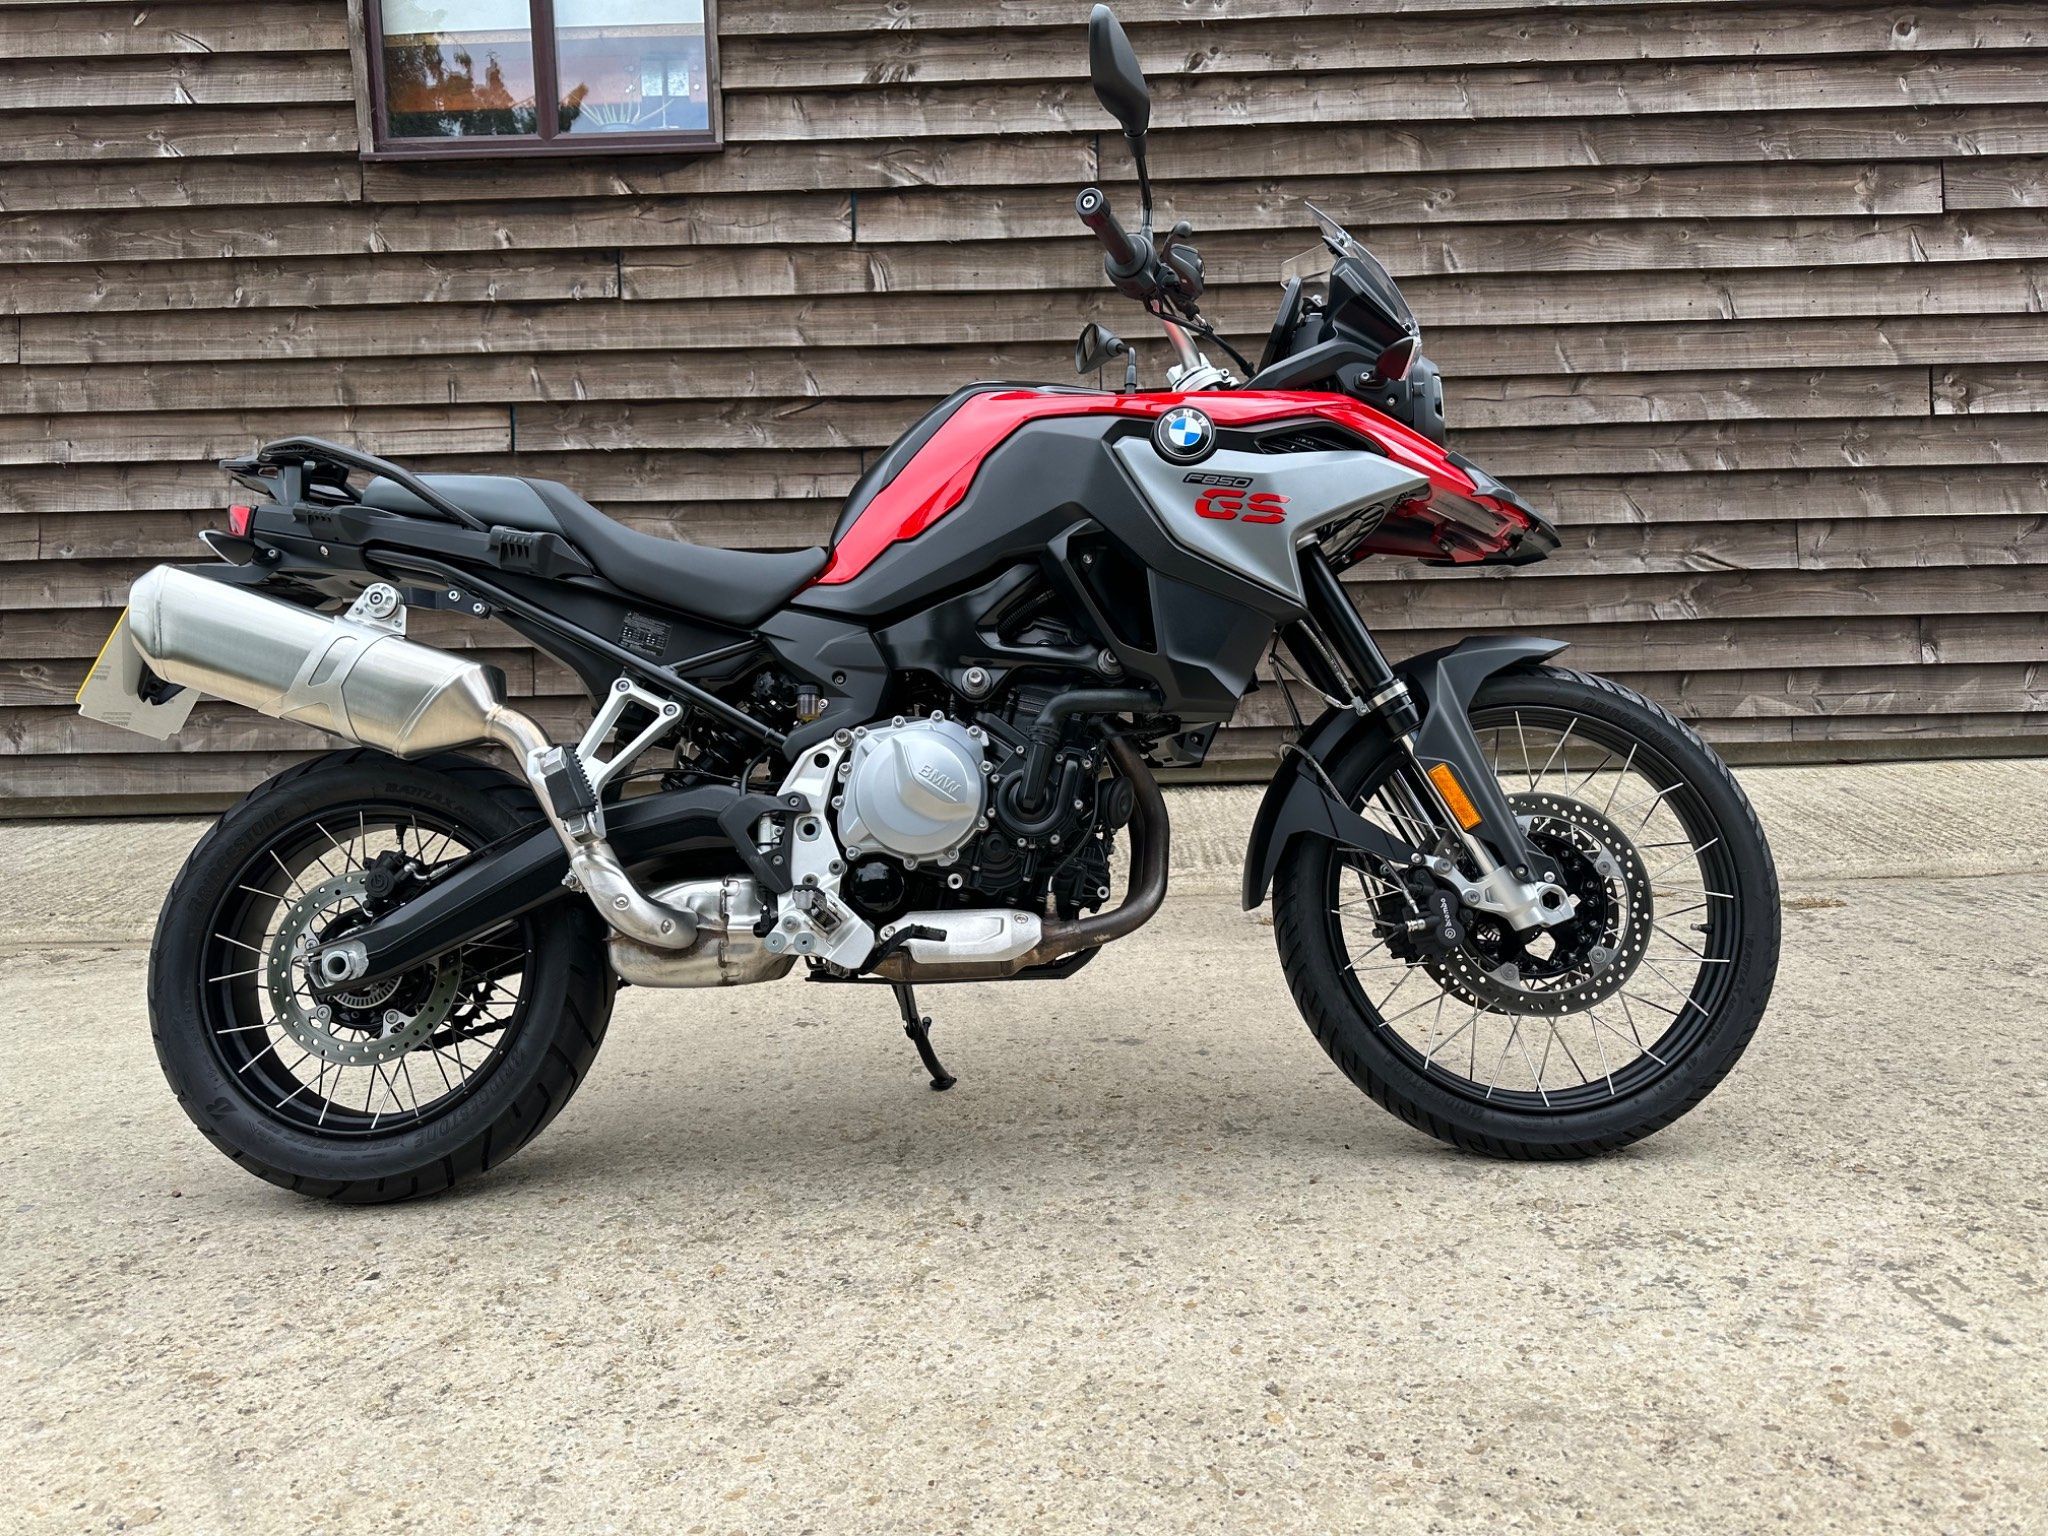 2020 BMW F850GS 850 GS Sport ABS From £109.32 per month 